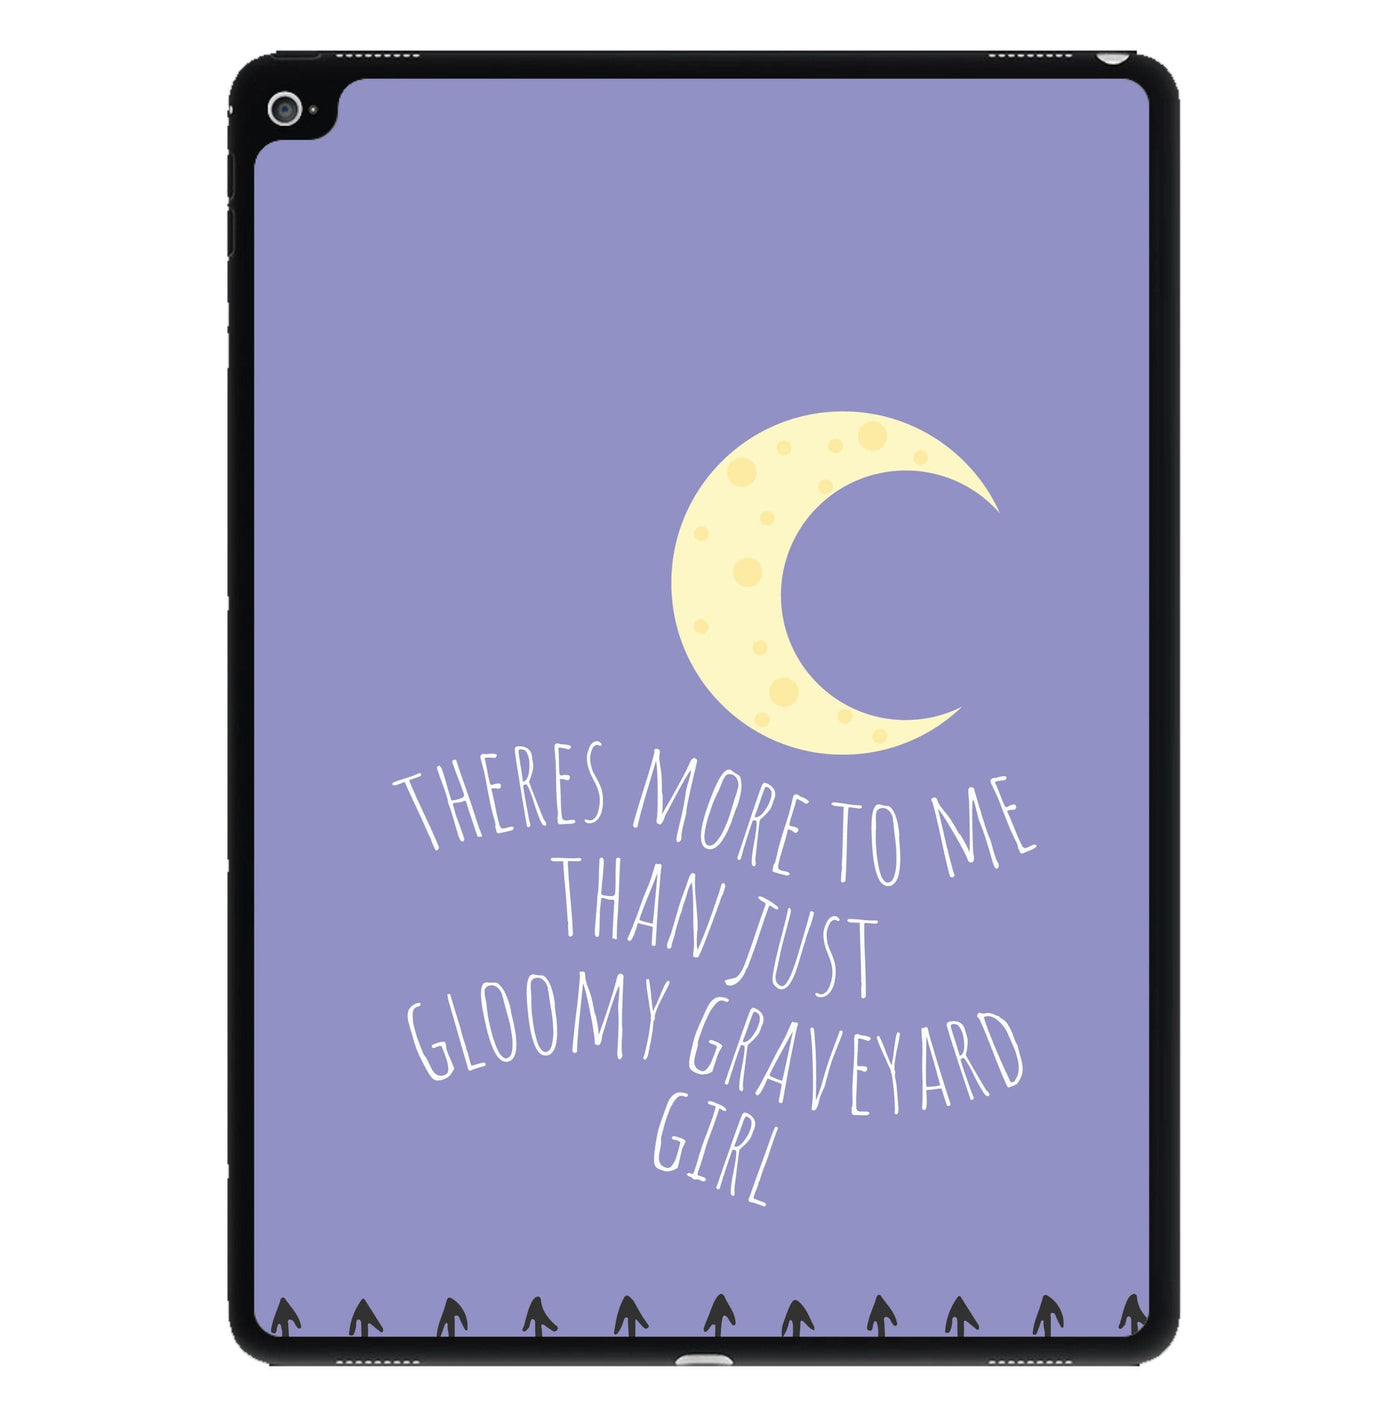 Theres More To Me - TV Quotes iPad Case